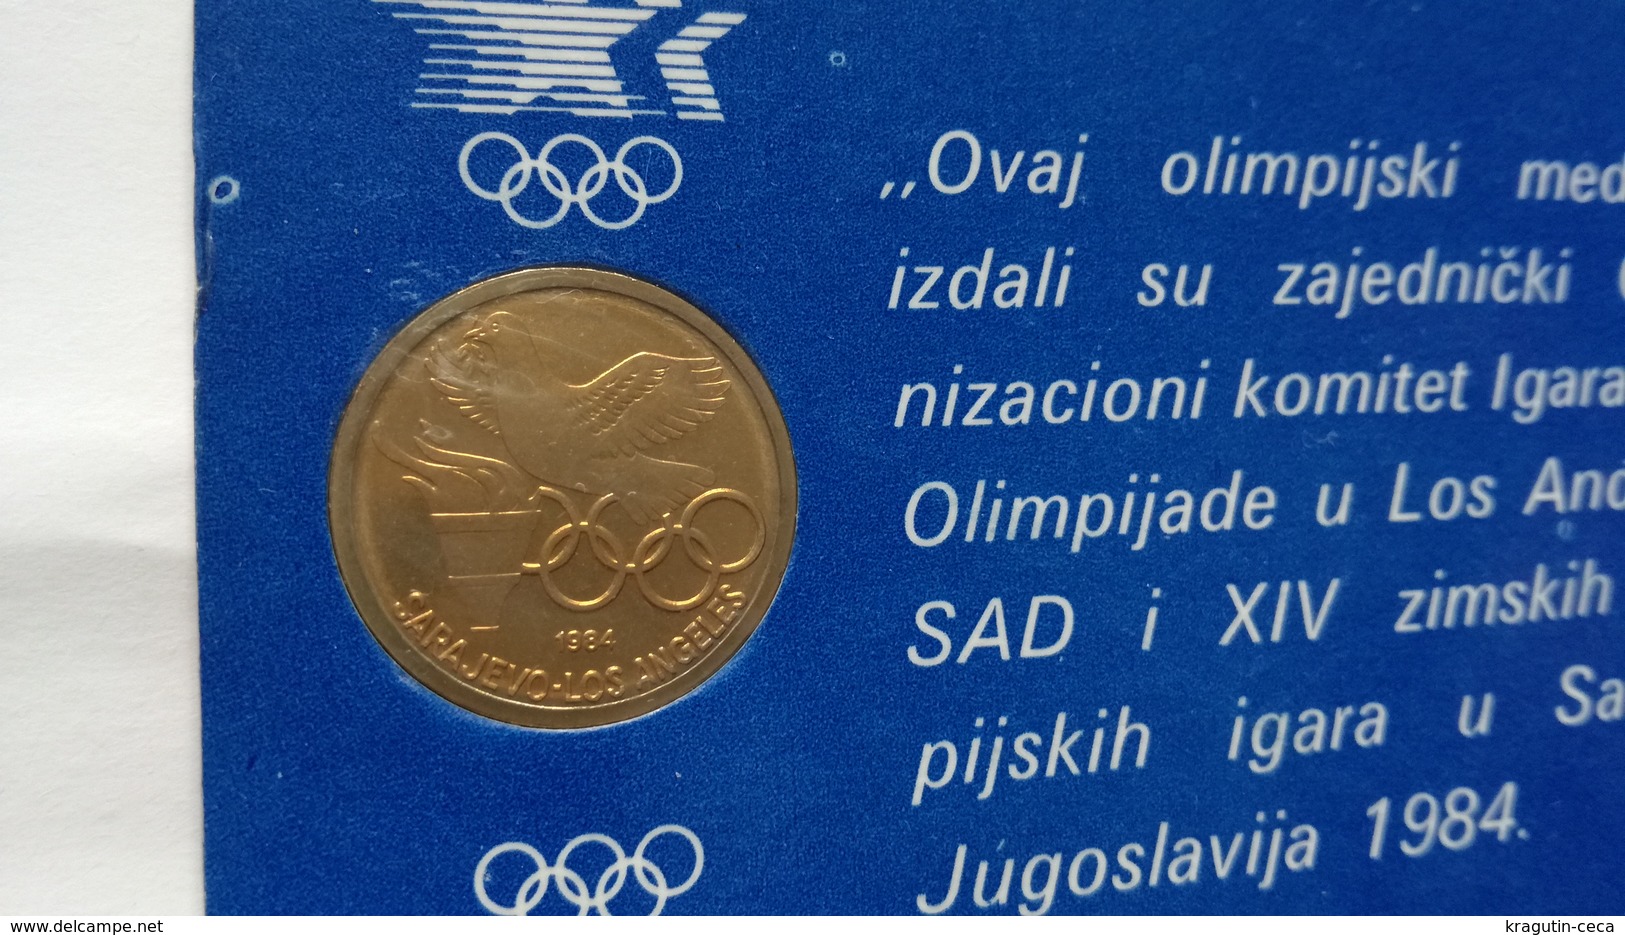 1984 OLYMPIC GAMES Coin XXIII Olympiad LOS ANGELES SARAJEVO Coin Medal Münze Medaille Pièce Monnaie OLYMPIADE Médaille - Bekleidung, Souvenirs Und Sonstige